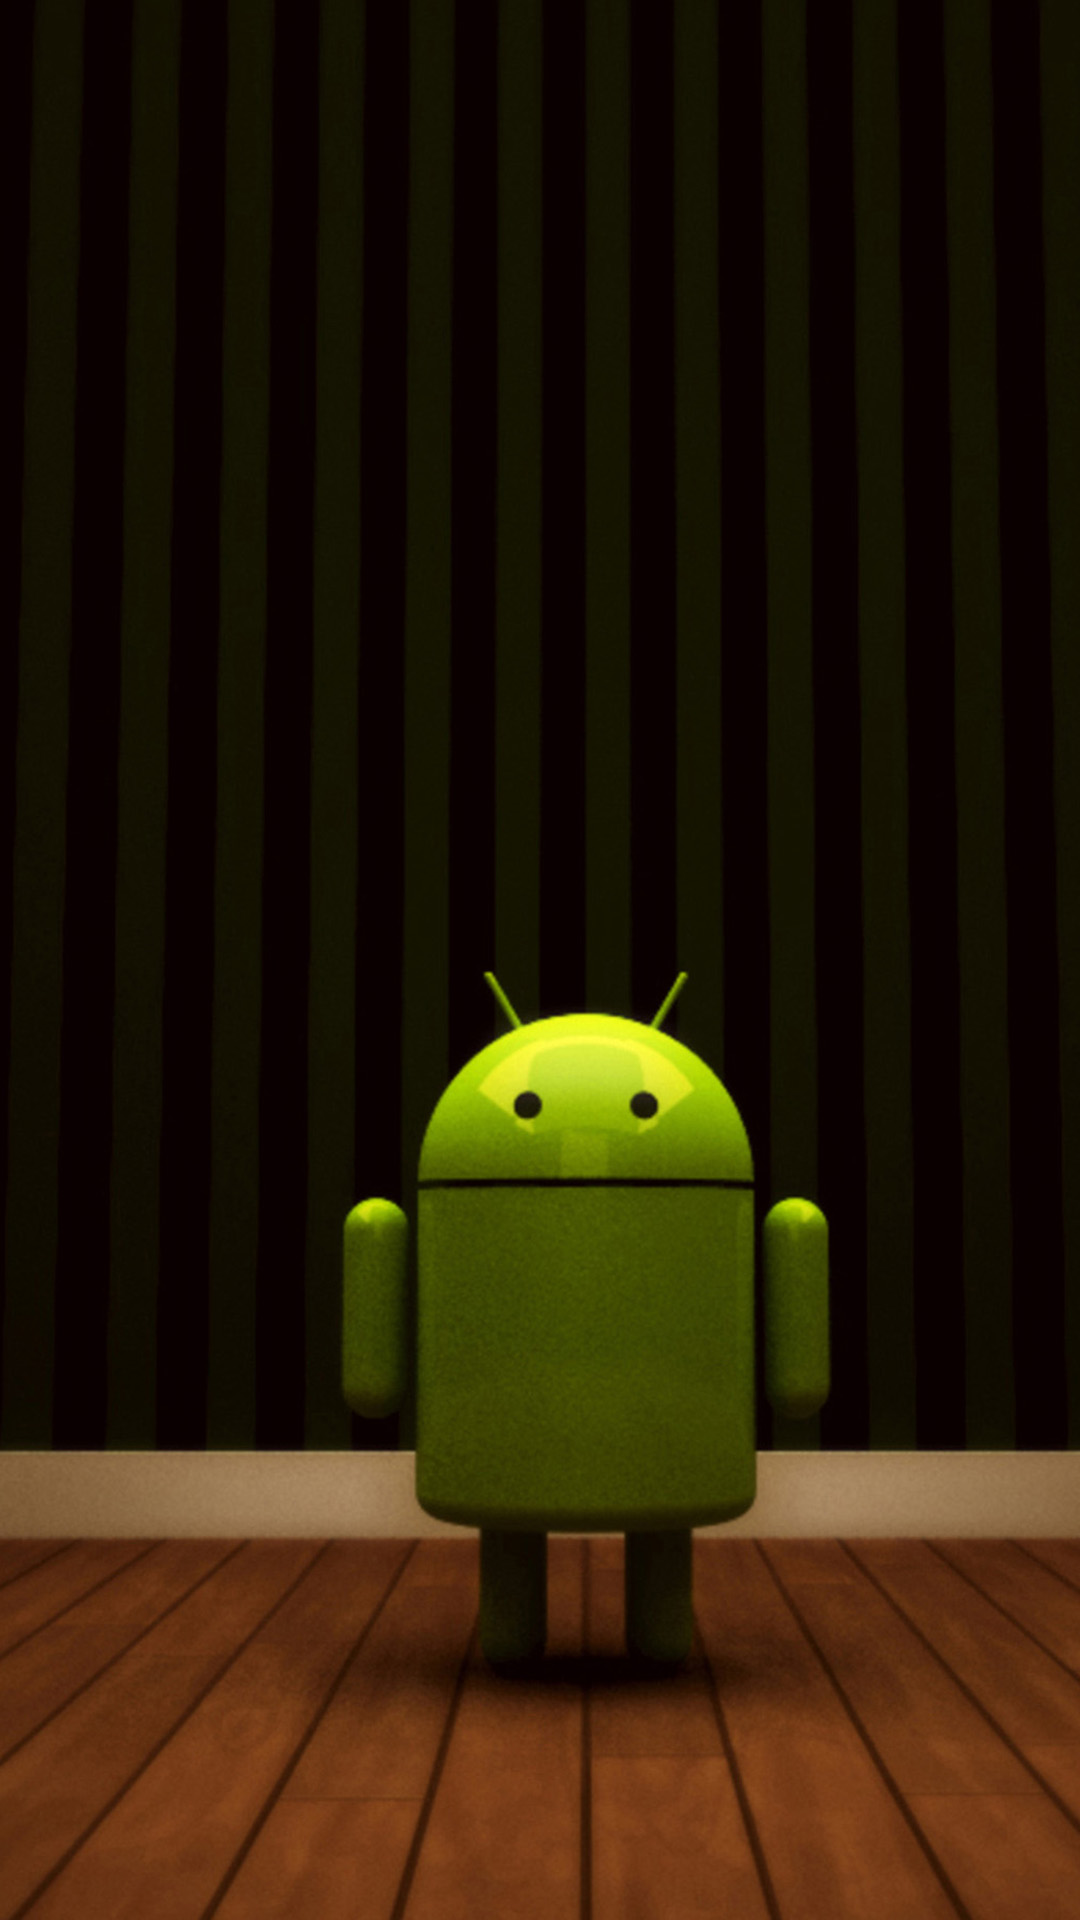 Android Sony Xperia Z2 Wallpapers 89 Xperia Z2 Wallpaper - Htc One Series - HD Wallpaper 